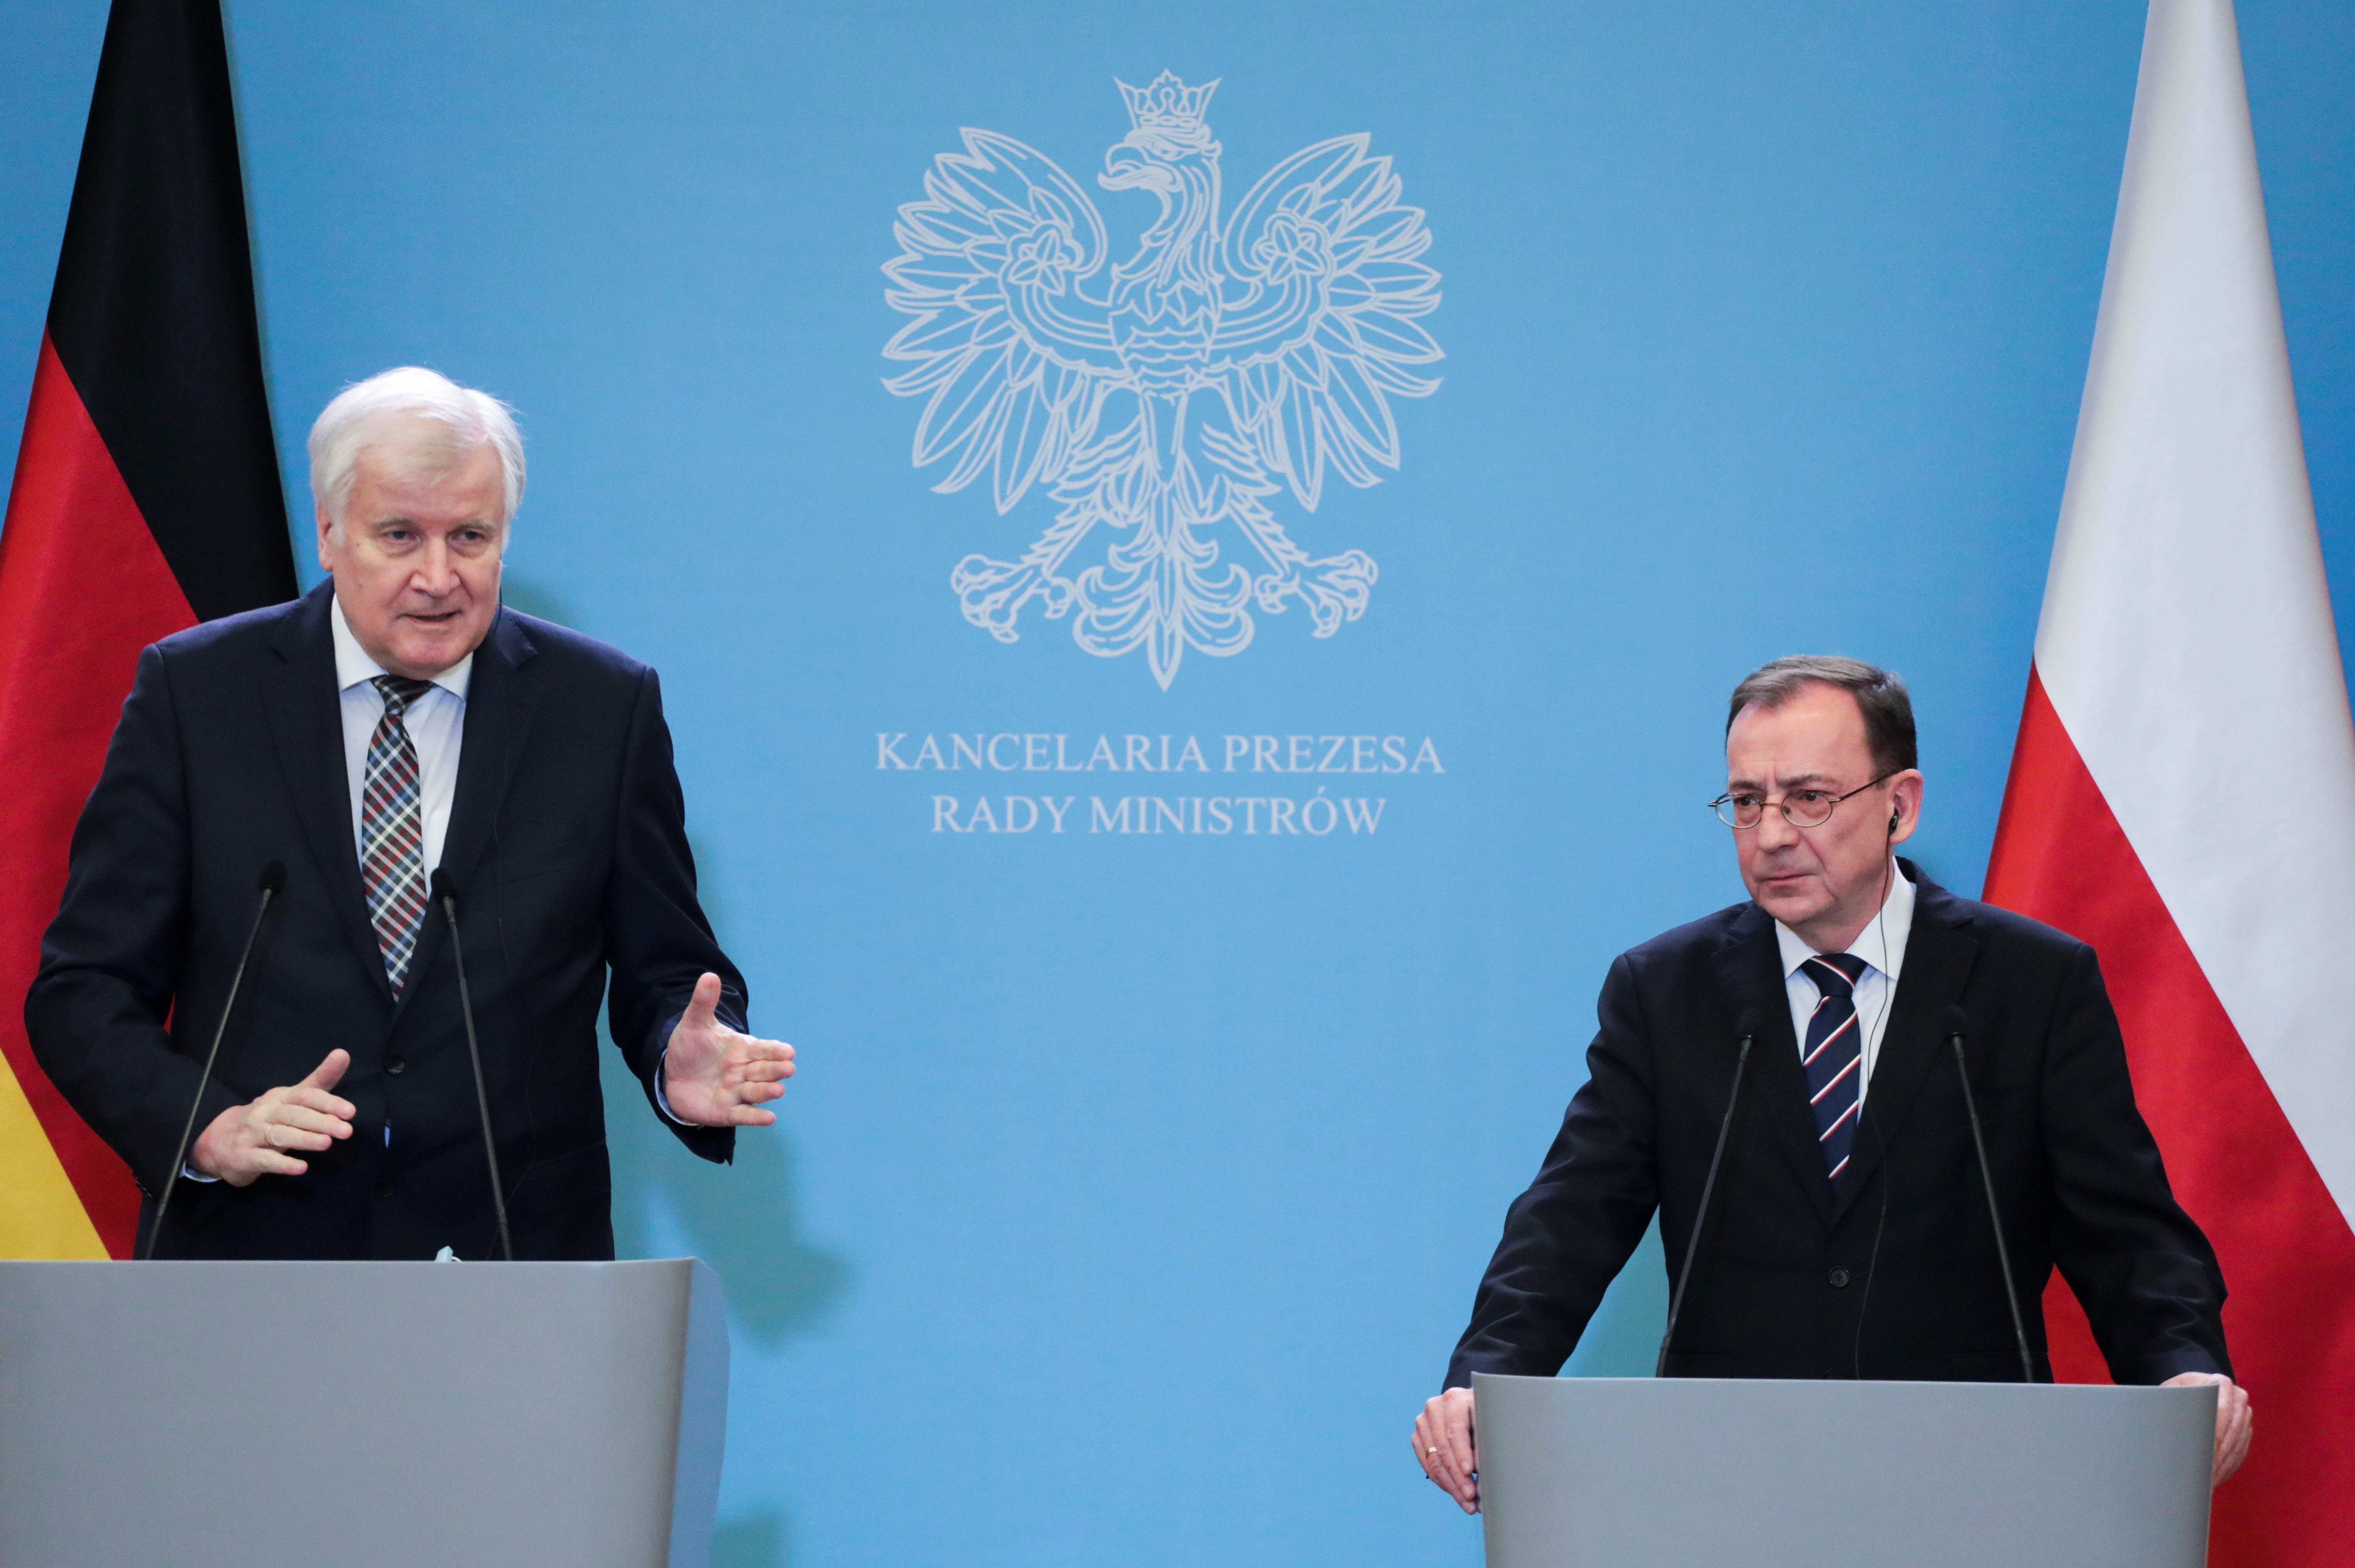 Germany's Interior Minister Seehofer and his Poland's counterpart Kaminski attend a news briefing in Warsaw